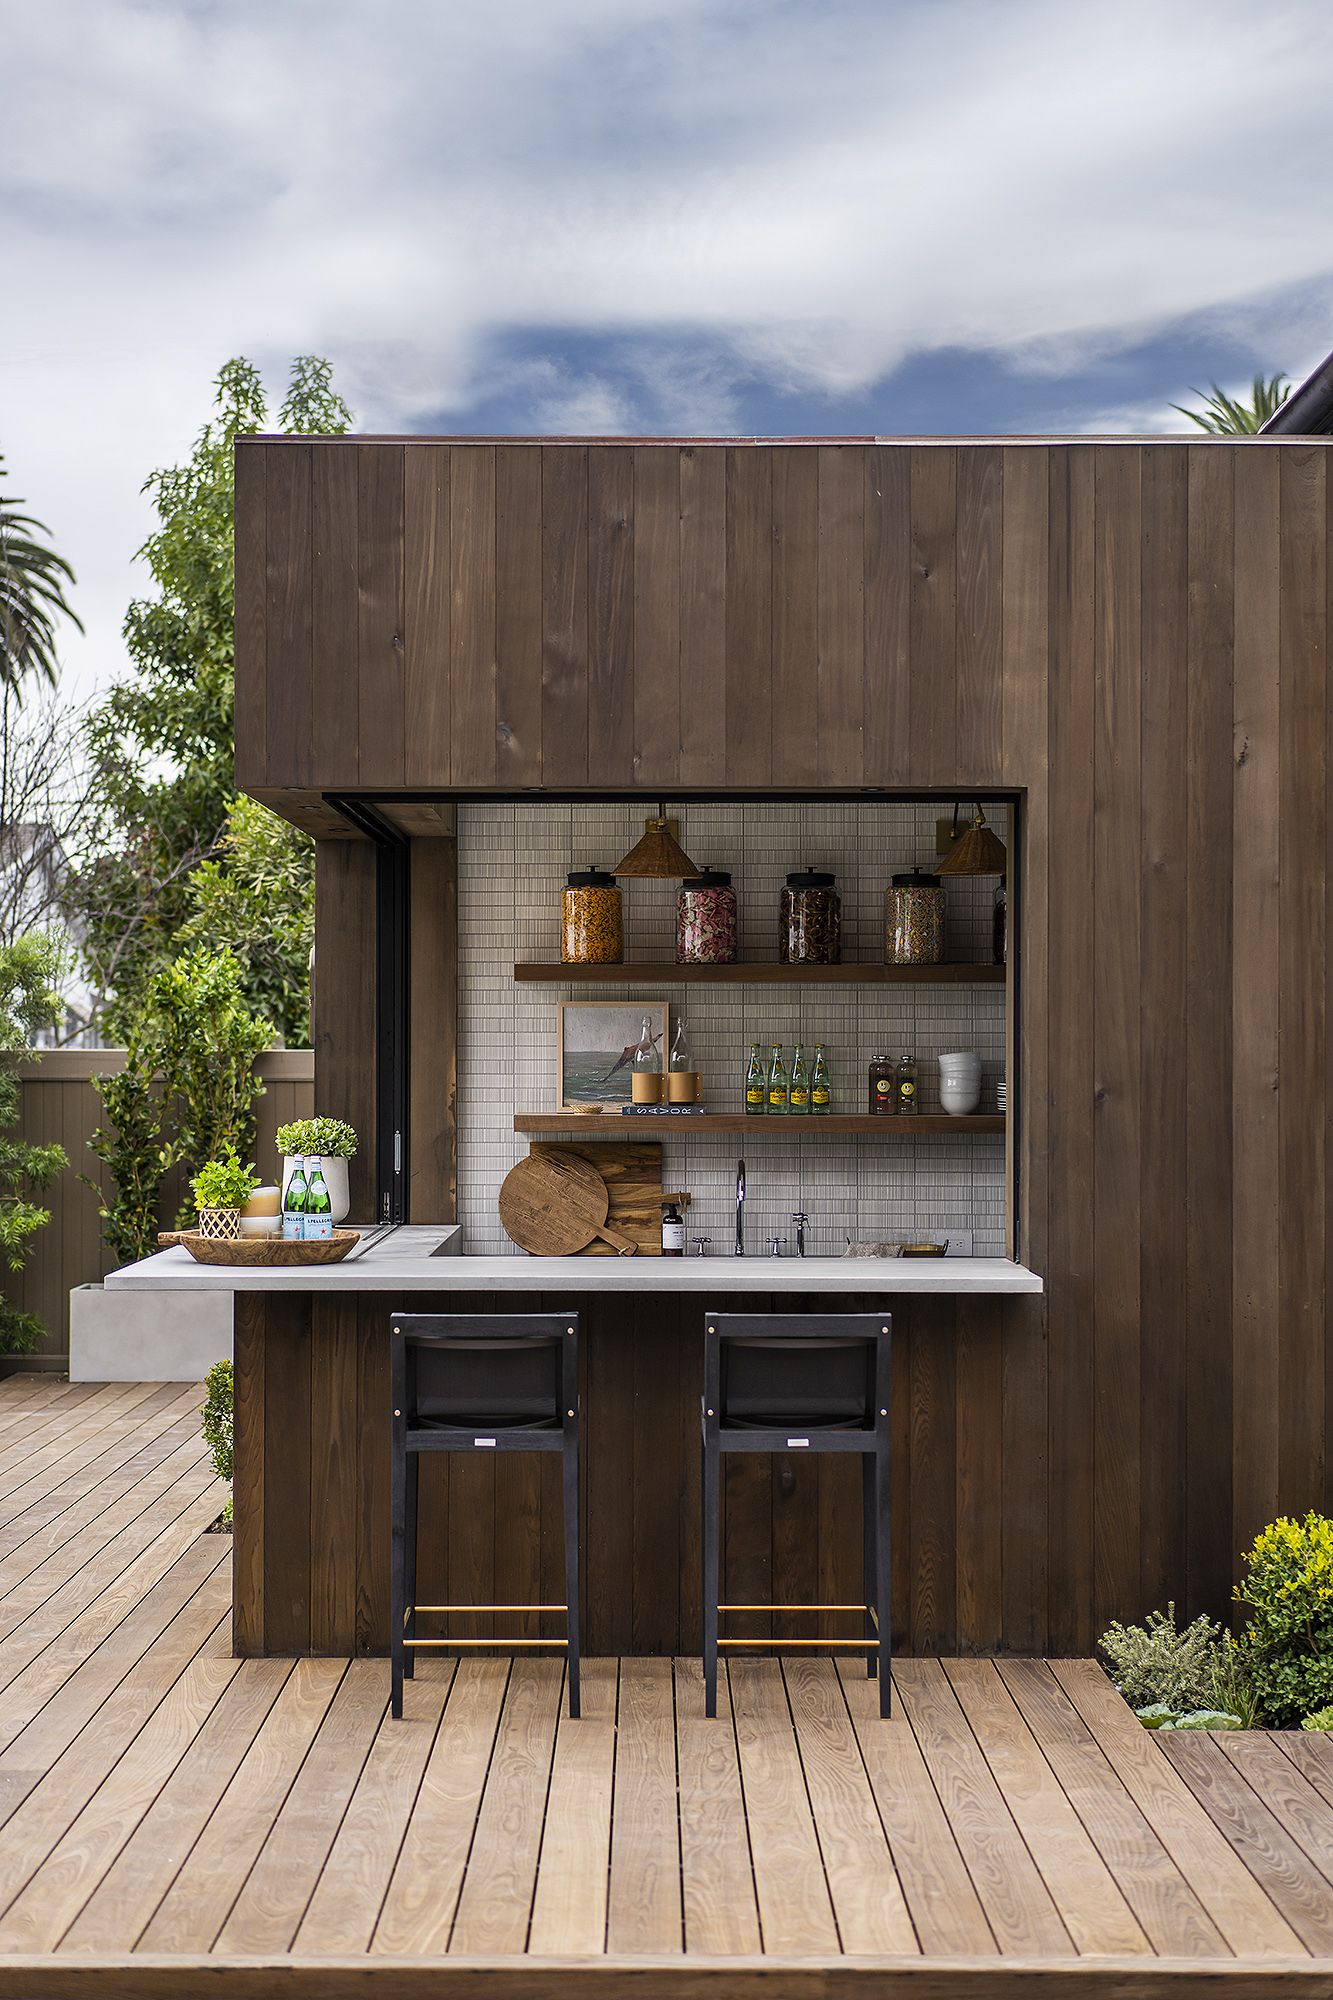 Outdoor Kitchen Design Ideas - Tips for Outdoor Cooking